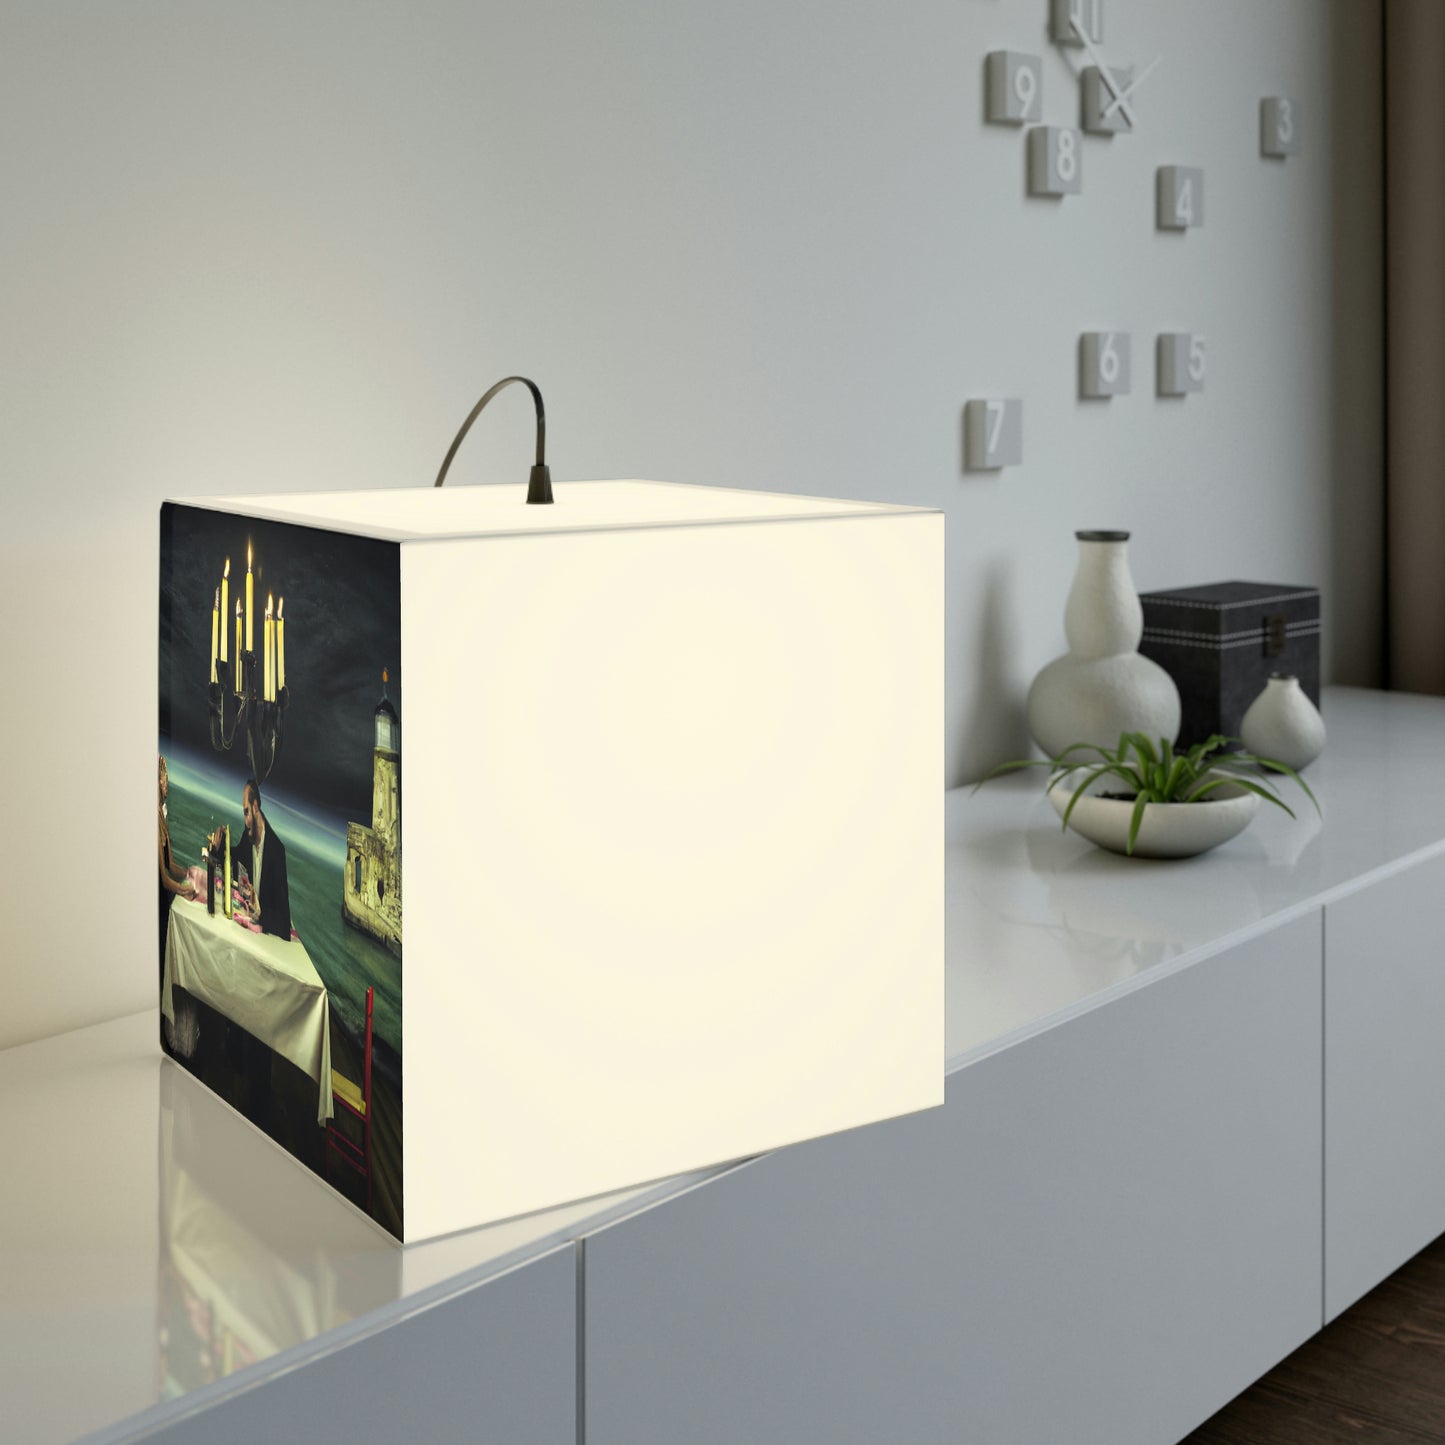 "A Beacon of Romance: An Intimate Candlelit Dinner in a Forgotten Lighthouse" - The Alien Light Cube Lamp